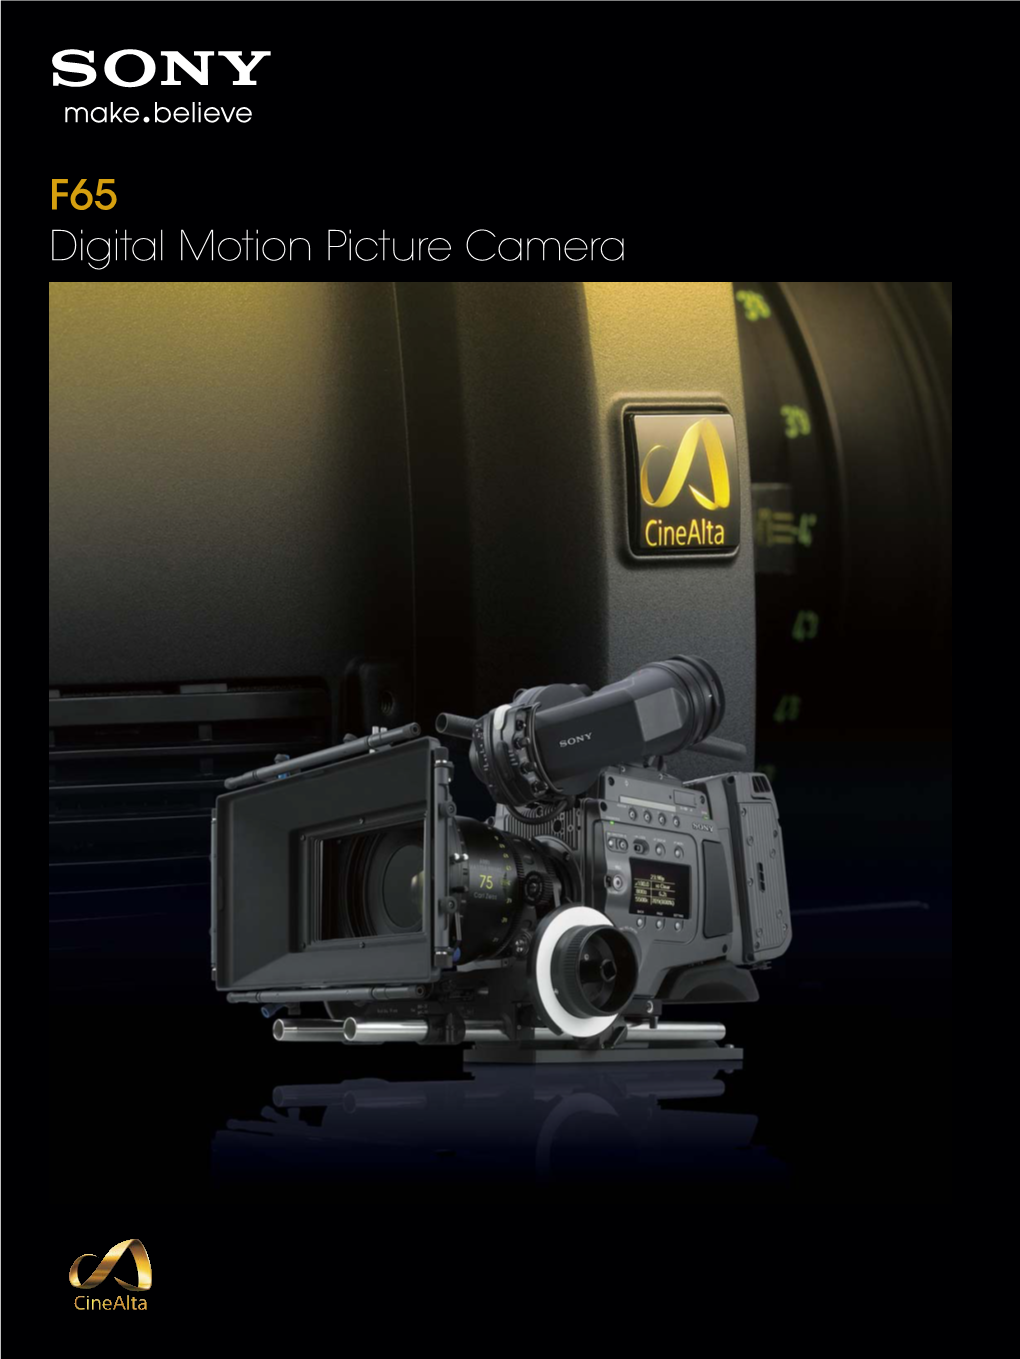 F65 Digital Motion Picture Camera Elevating Digital Imaging to the Next Level